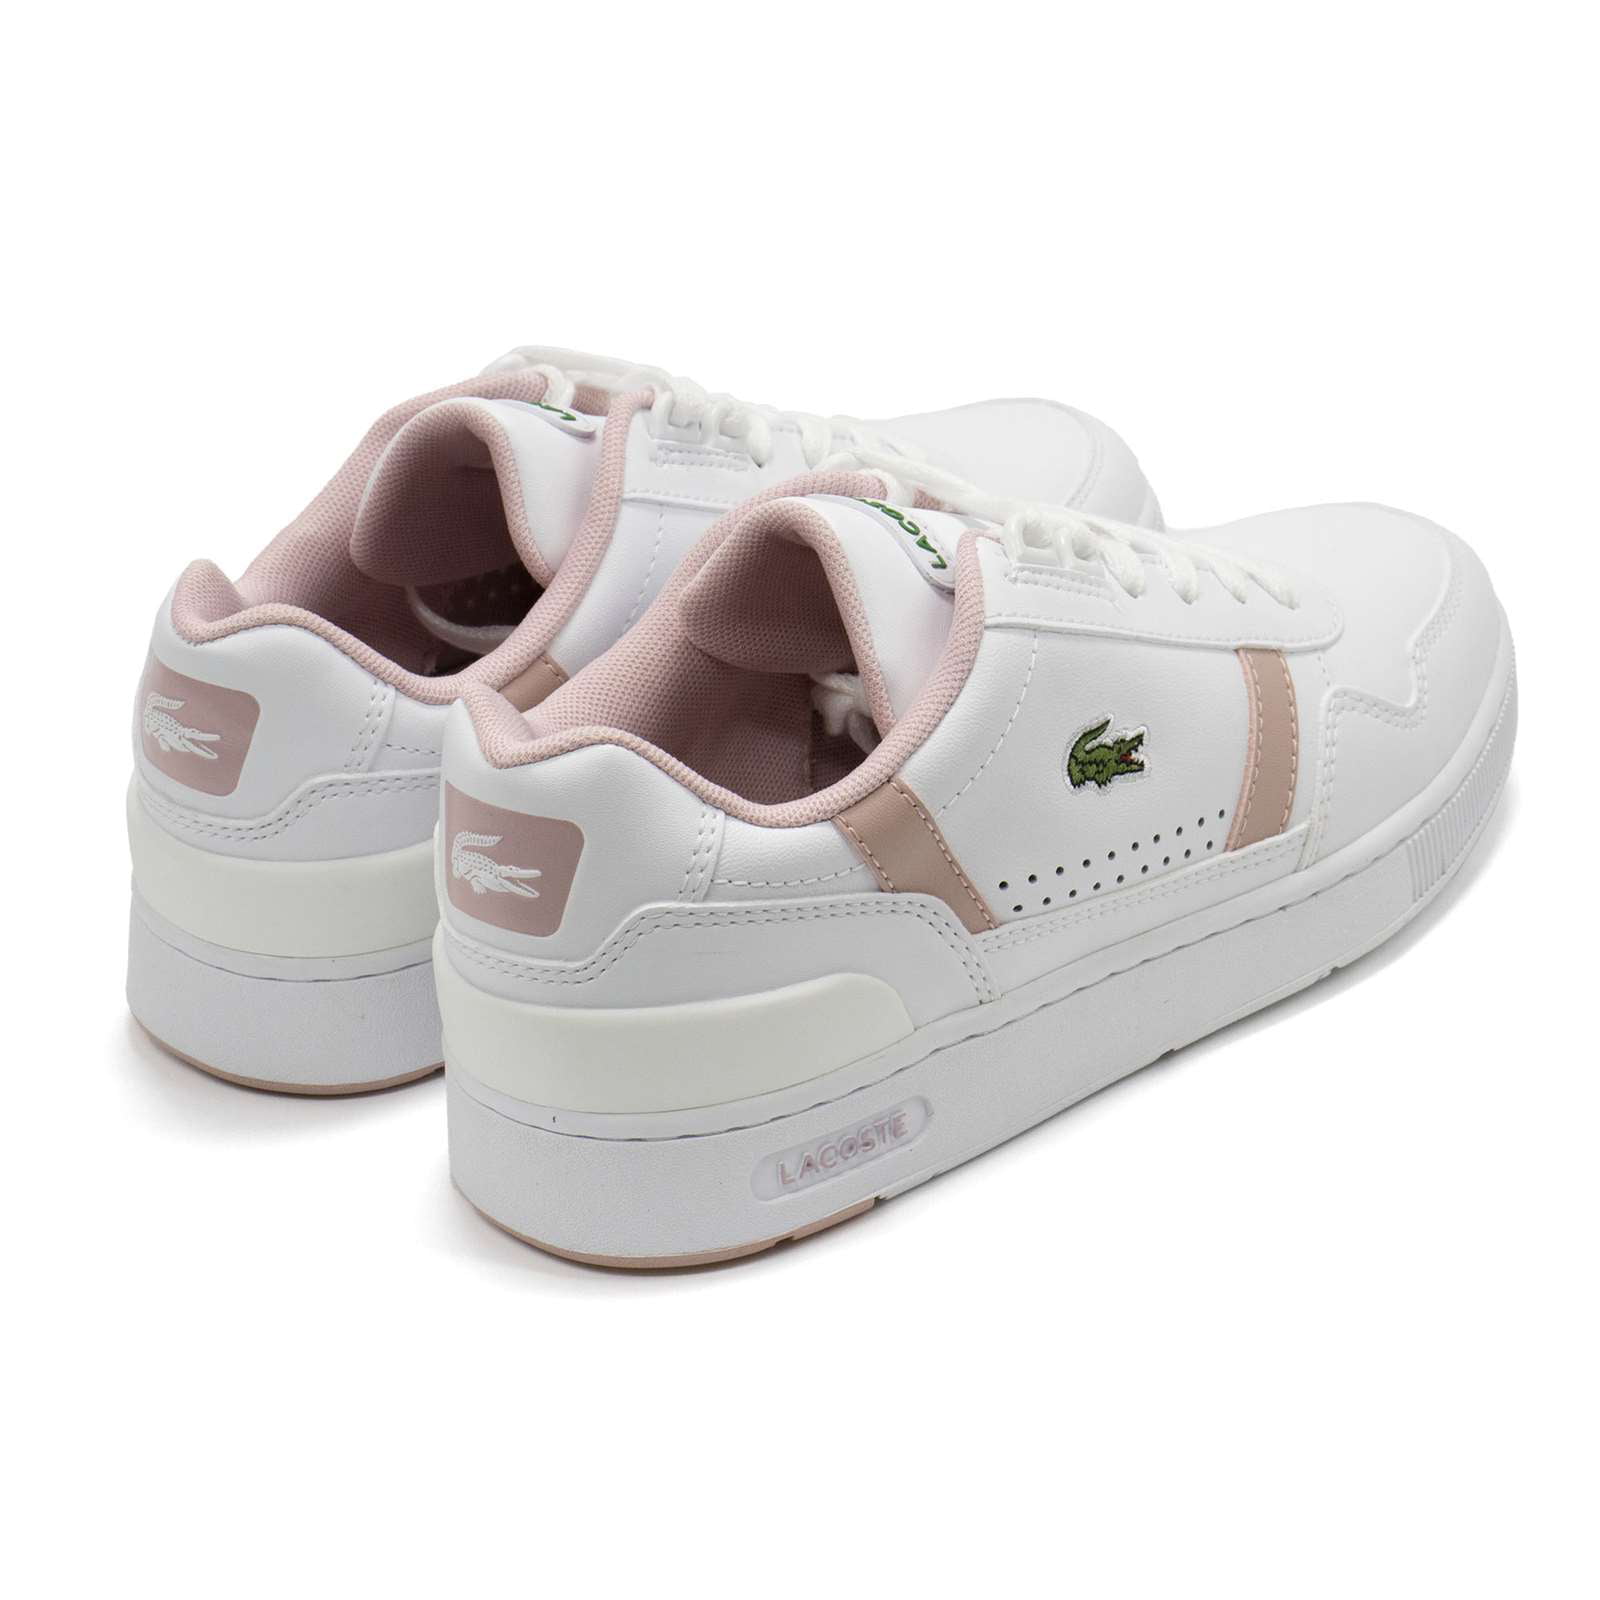 illoyalitet måtte samlet set Lacoste Women's T-Clip Perforated Trainers Shoes, White \ Light Pink,9 M US  - Walmart.com